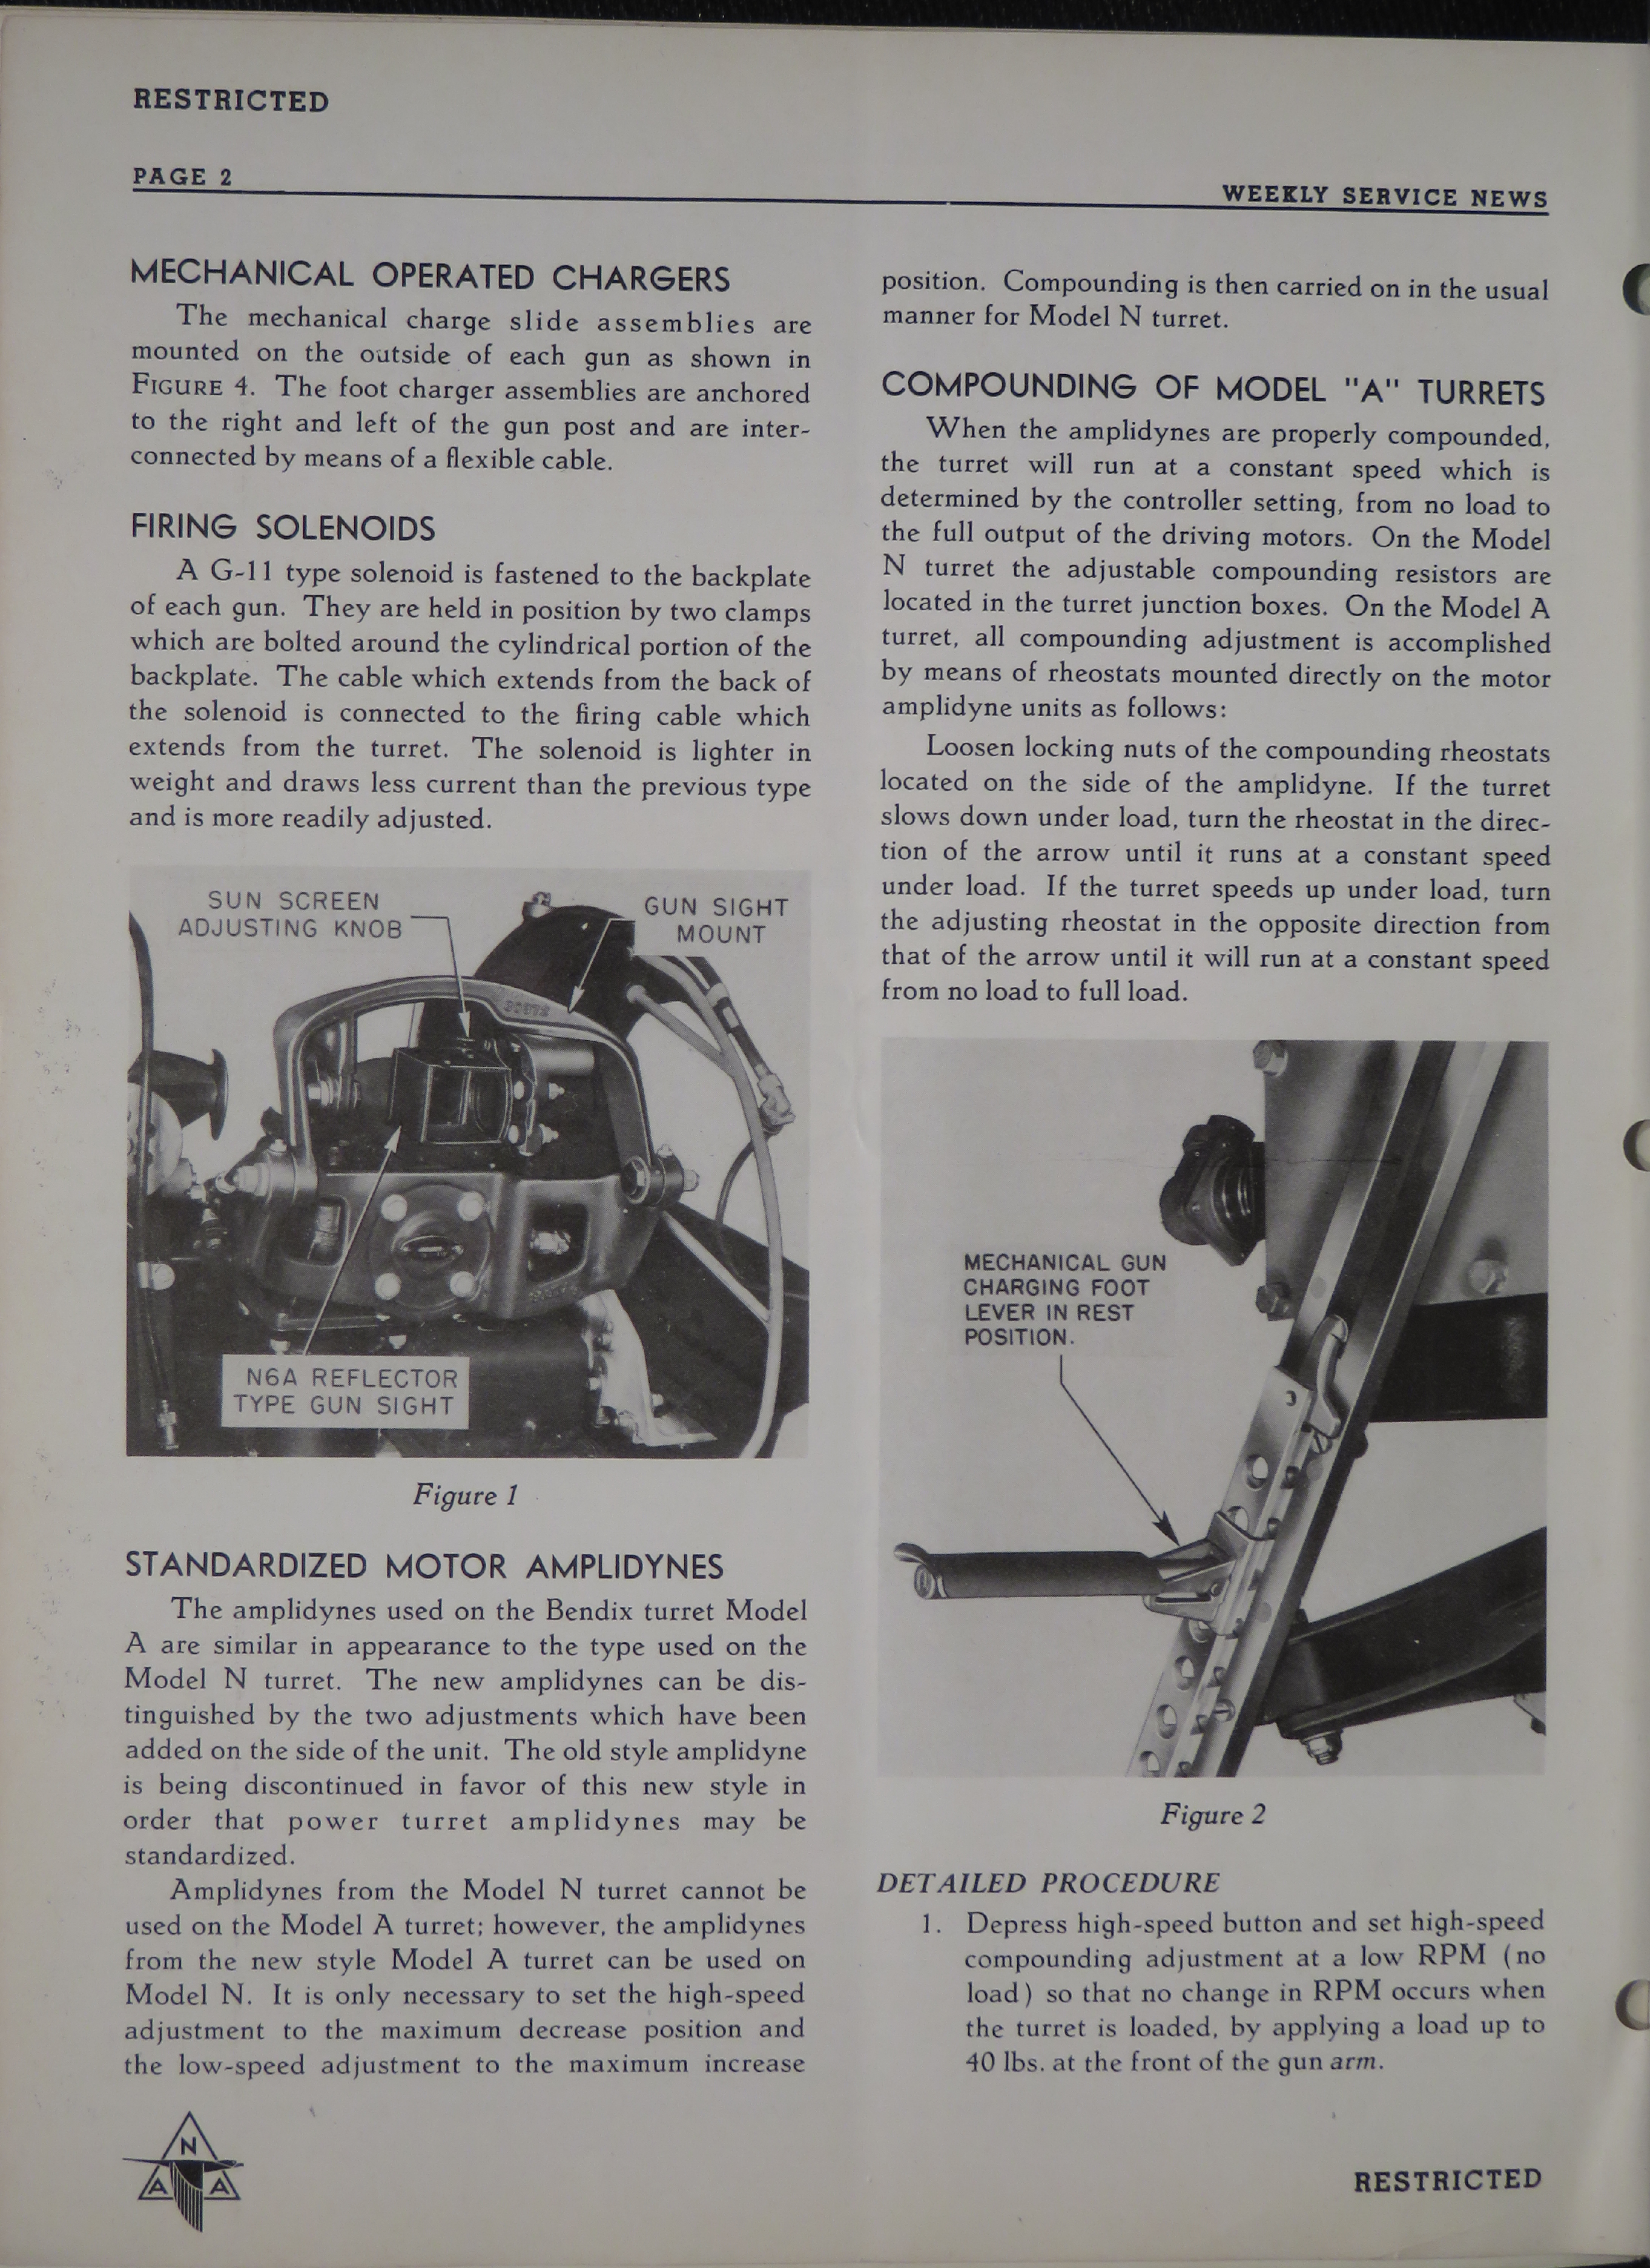 Sample page 2 from AirCorps Library document: Volume 1, No. 36 - Weekly Service News